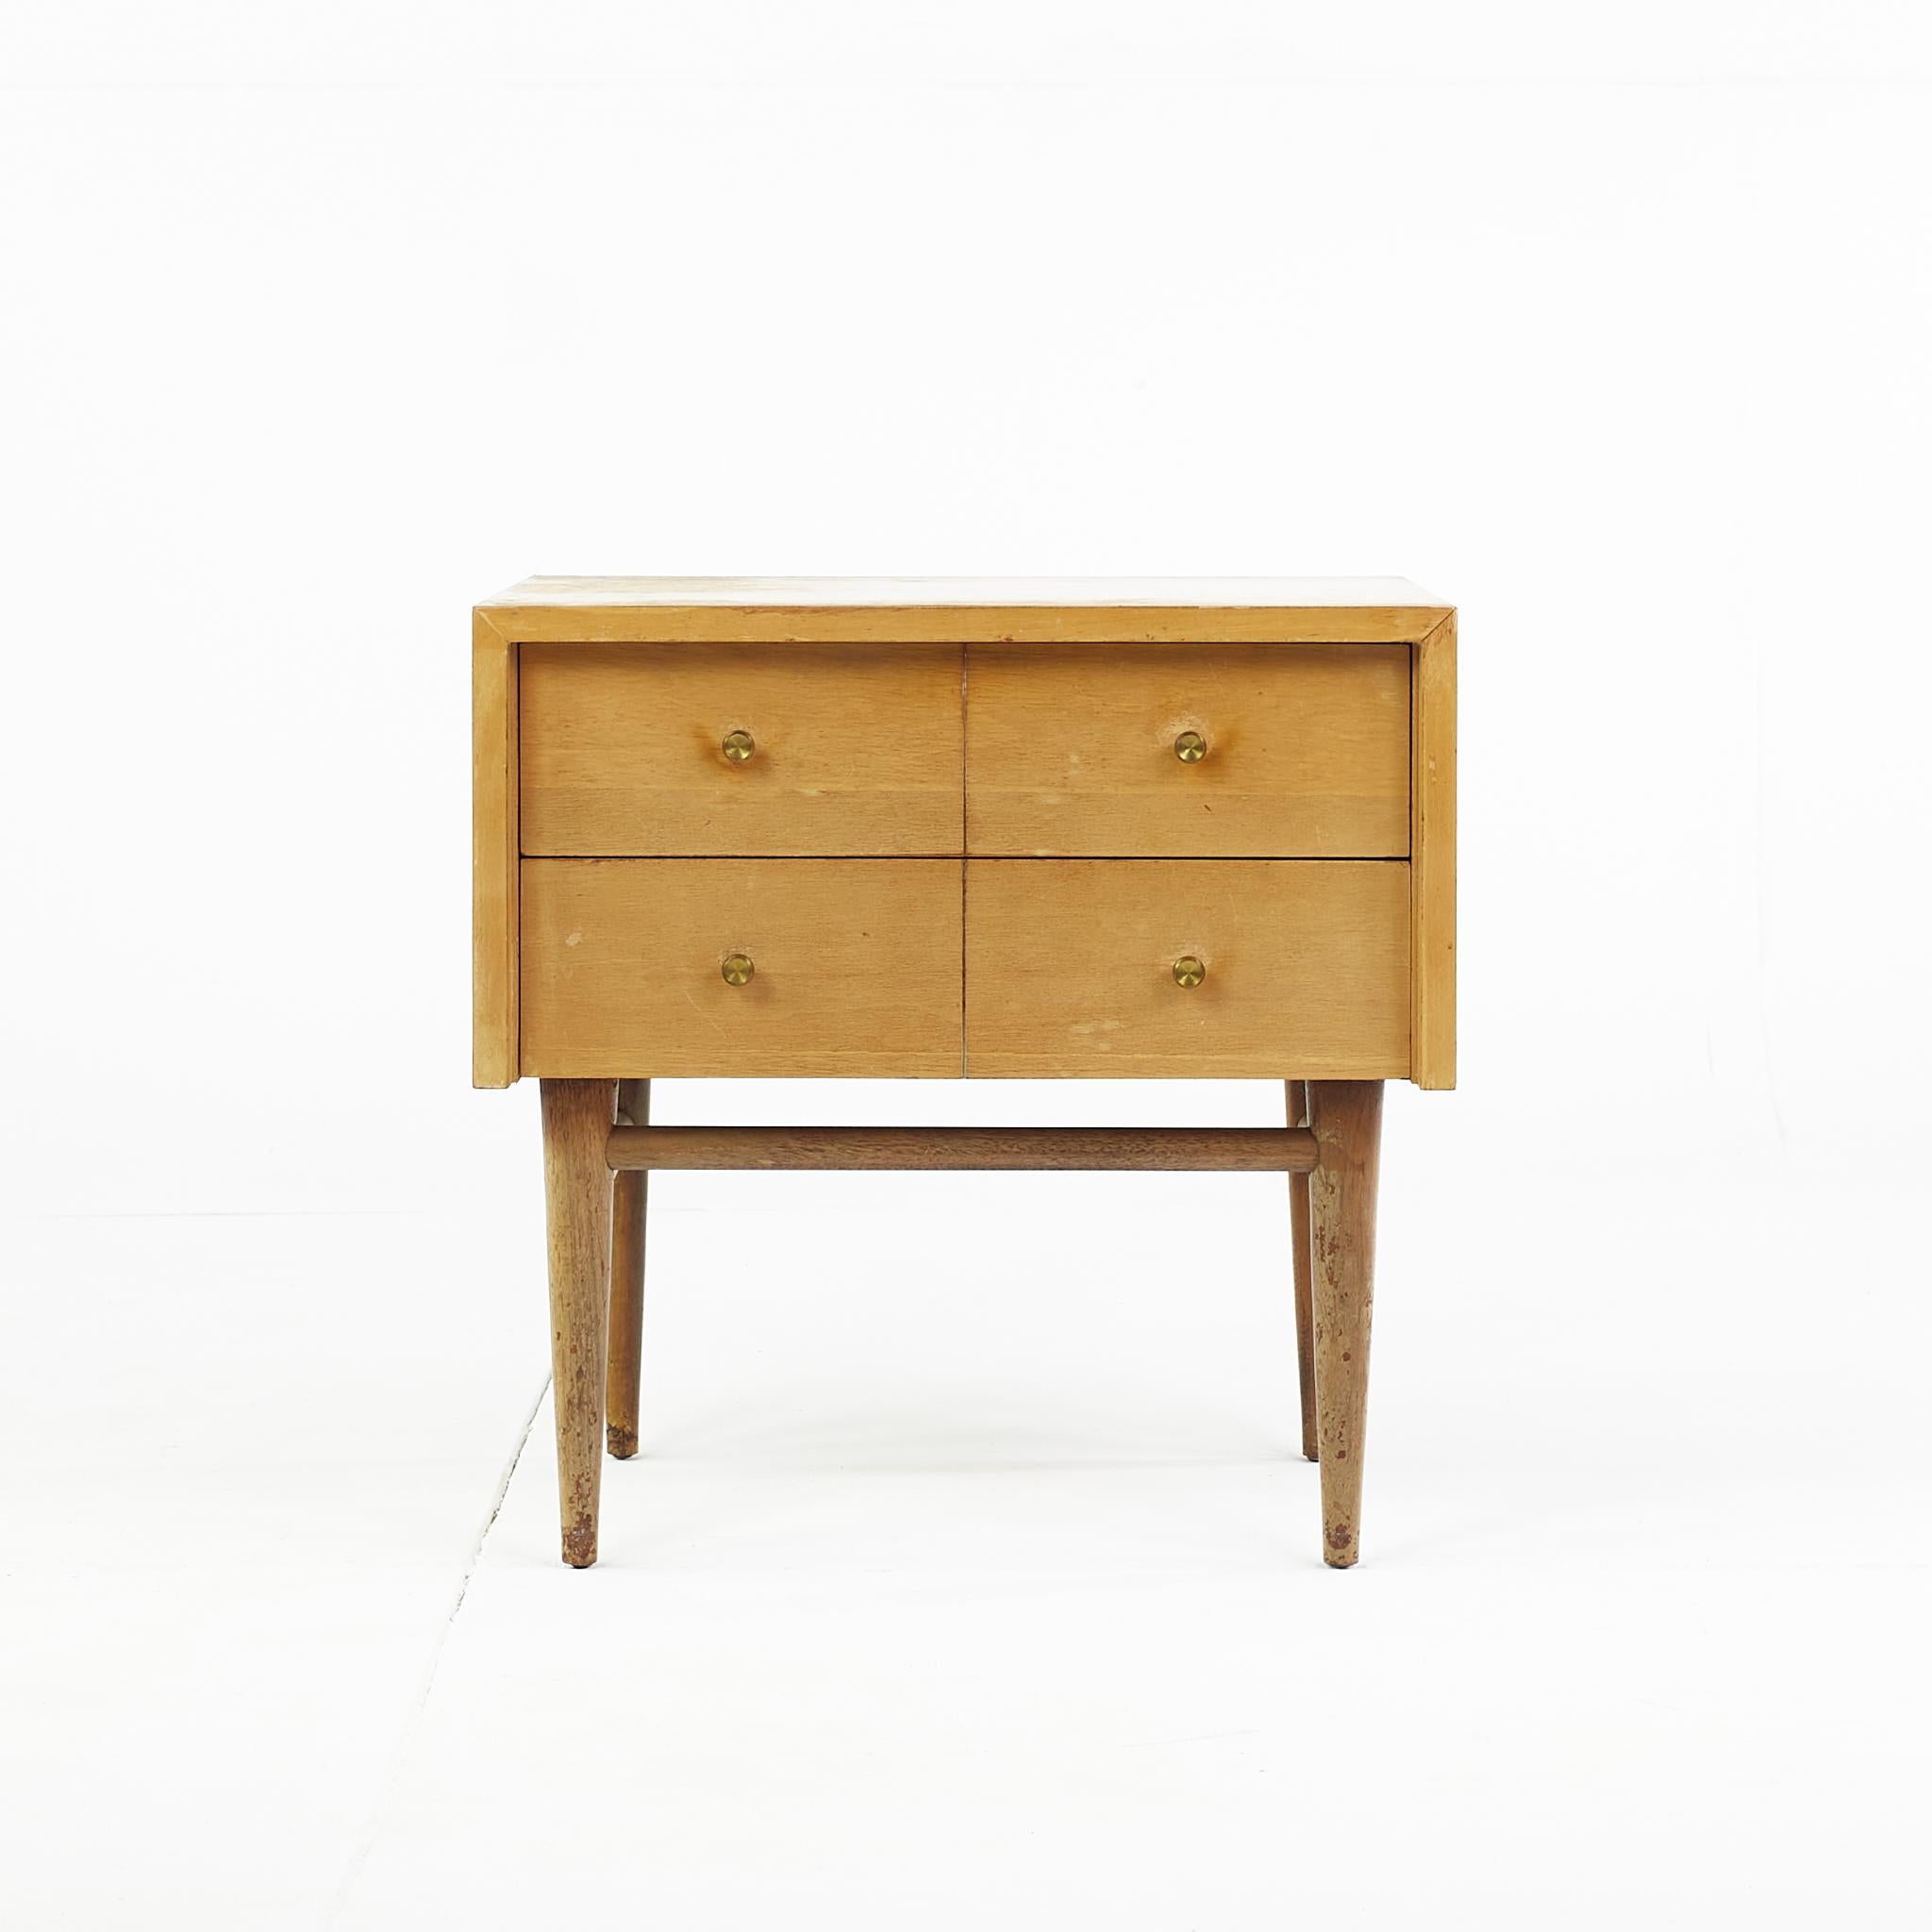 Merton Gershun for American of Martinsville mid century urban suburban nightstand

This nightstand measures: 22 wide x 17 deep x 22 inches high

All pieces of furniture can be had in what we call restored vintage condition. That means the piece